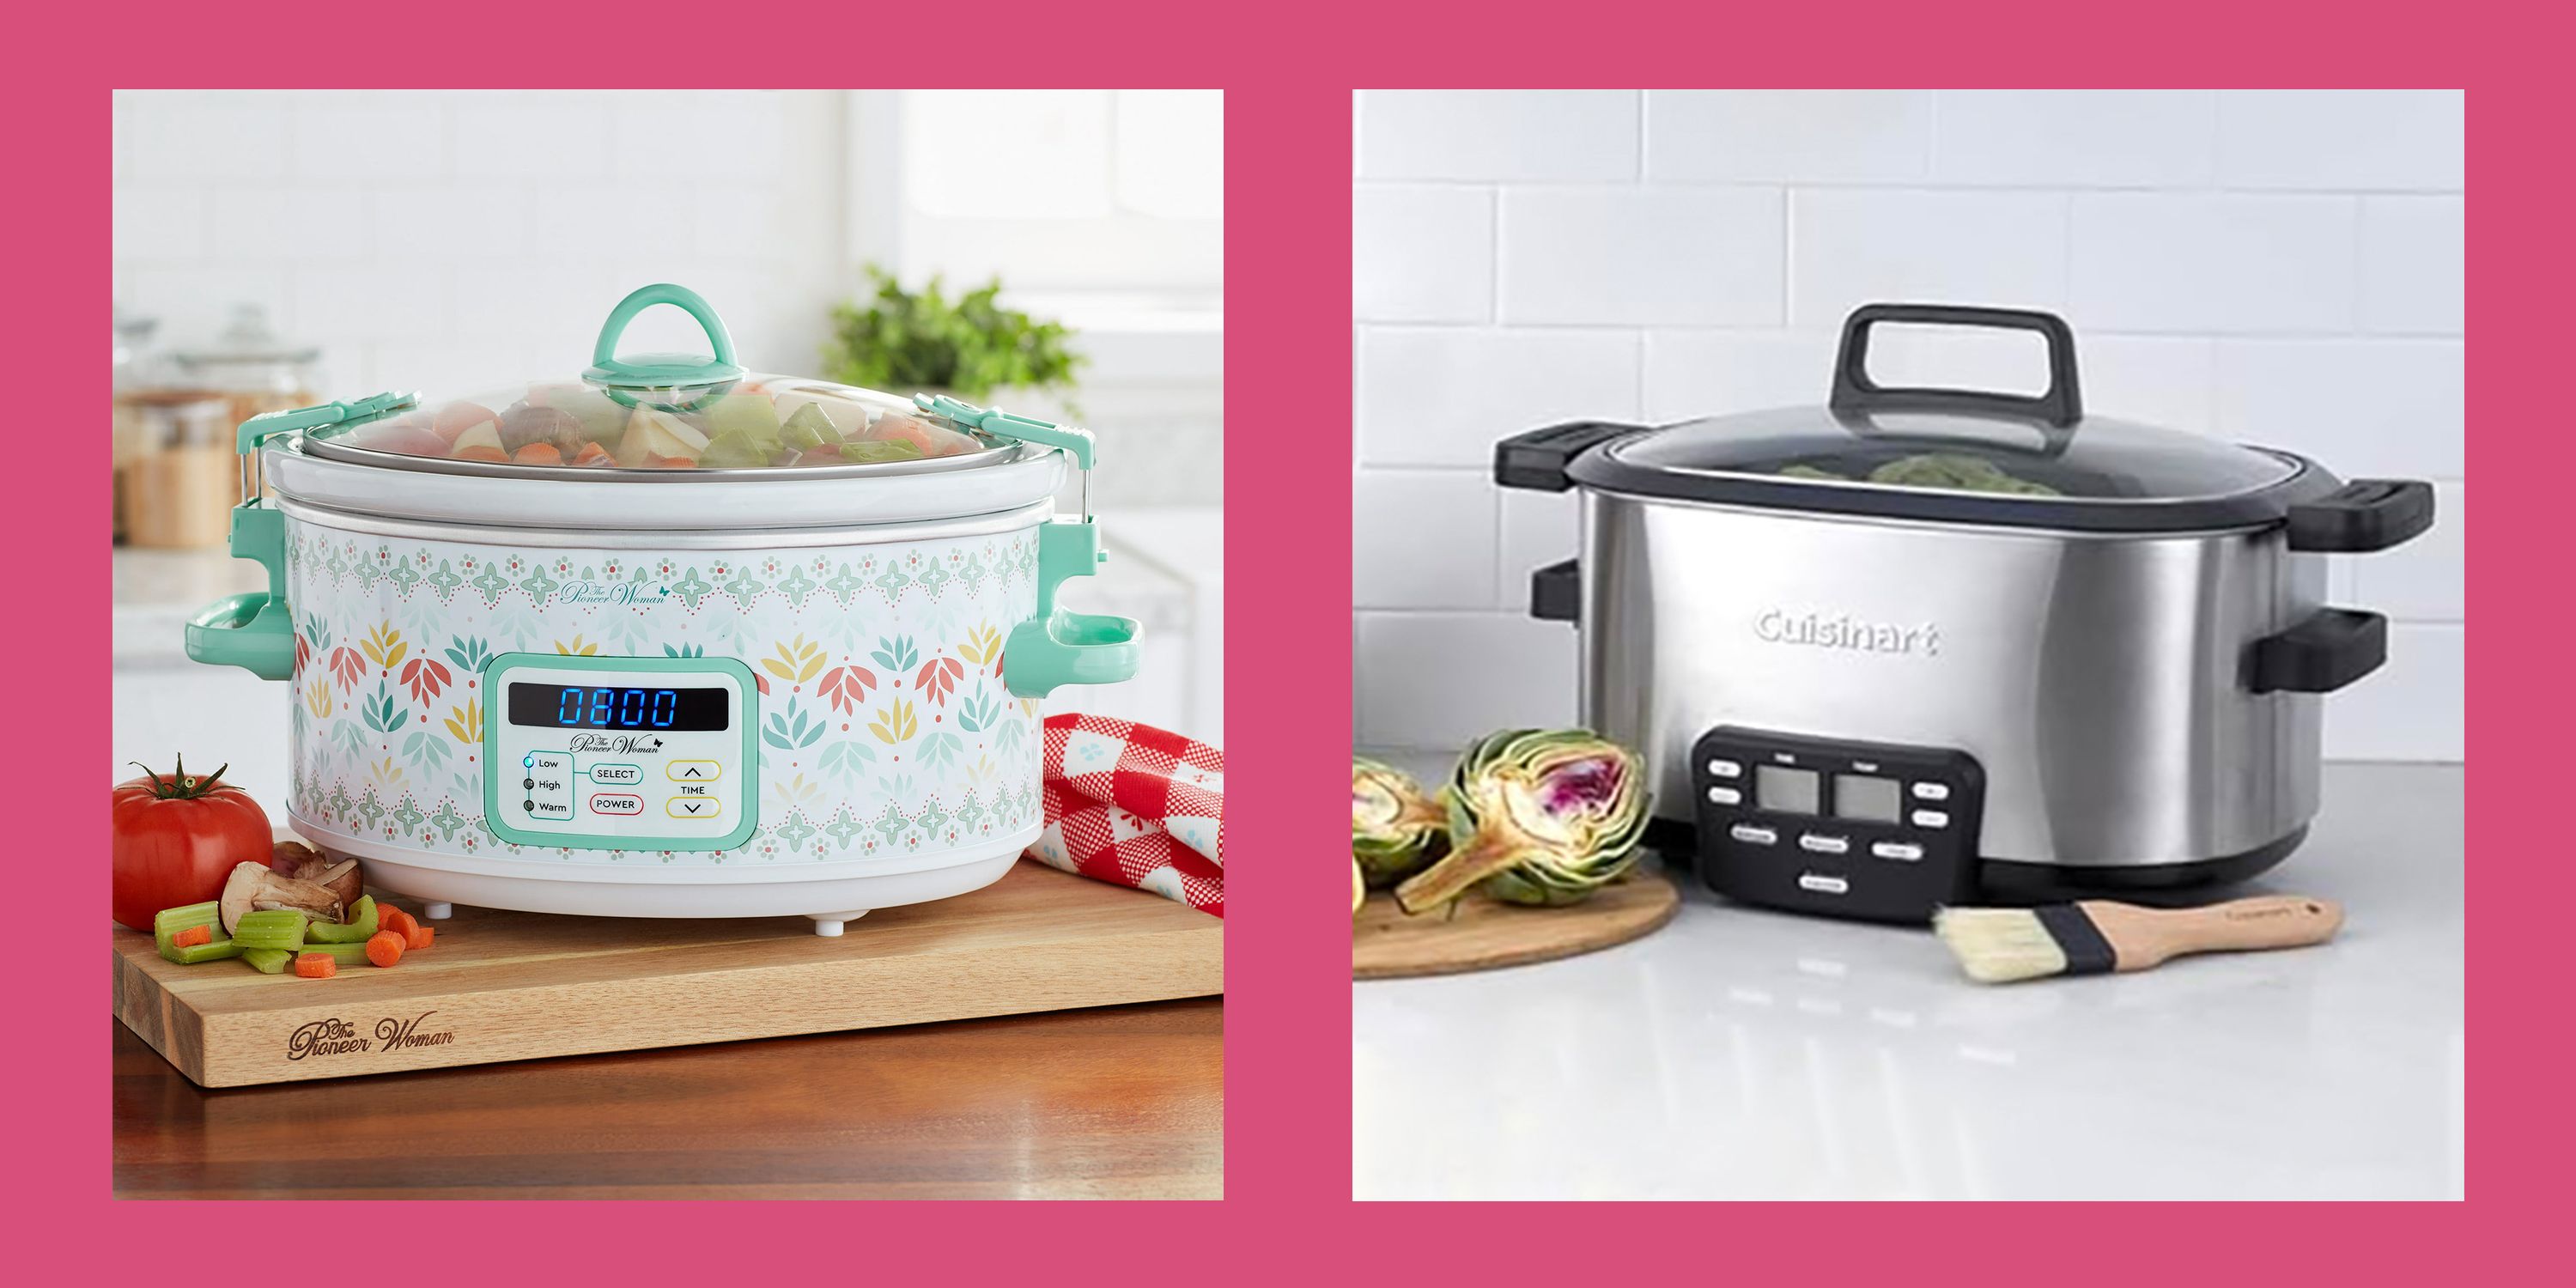 <p>Fact: Slow cookers are the unsung heroes of kitchen appliances. Seriously, though we love the speed of <a href="https://www.thepioneerwoman.com/food-cooking/g33854357/best-air-fryers/">air fryers</a>, a slow cooker is the one appliance where you can simply set it and forget it. You can go about your day and come home hours later to a comforting <a href="https://www.thepioneerwoman.com/food-cooking/meals-menus/g32084340/family-meal-ideas/">family meal</a>. And since the original Crock-Pot came on the scene in the nearly 50 years ago, there are literally decades worth of <a href="https://www.thepioneerwoman.com/food-cooking/meals-menus/g32264194/best-crock-pot-recipes/">slow cooker recipes</a>. You just have to select one of the best slow cookers first and you're ready to go!</p><p>Slow cookers are also the ultimate time-savers in the kitchen. Beyond the ease of simply pressing a button—especially with the digital functionality and preset options of newer models―there's often way less prep work ahead of time. Even Ree Drummond, who we know<em> loves </em>to cook, once said, "I just want to sling it in the slow cooker and be done." Honestly, same! And that means cleanup is just as easy. You have one vessel to clean out, versus a stack of pots and pans piled high in the sink.</p><p>It's also worth mentioning just how versatile slow cookers are. Sure, they make excellent <a href="https://www.thepioneerwoman.com/food-cooking/meals-menus/g31954573/best-soup-recipes/">soup recipes</a>, but they can also make other <a href="https://www.thepioneerwoman.com/food-cooking/meals-menus/g42406161/healthy-crock-pot-recipes/">healthy weeknight dinners</a>, <a href="https://www.thepioneerwoman.com/food-cooking/meals-menus/g32021579/party-dip-recipes/">party dips</a>, and even <a href="https://www.thepioneerwoman.com/food-cooking/meals-menus/g38739353/crockpot-recipes-for-two/">meals for two</a>. There is also a huge variety of options in terms of size, function, and price, so there is sure to be a great option for you no matter your needs. So act fast now and then see just how slow you can go with all the yummy meals ahead.</p>